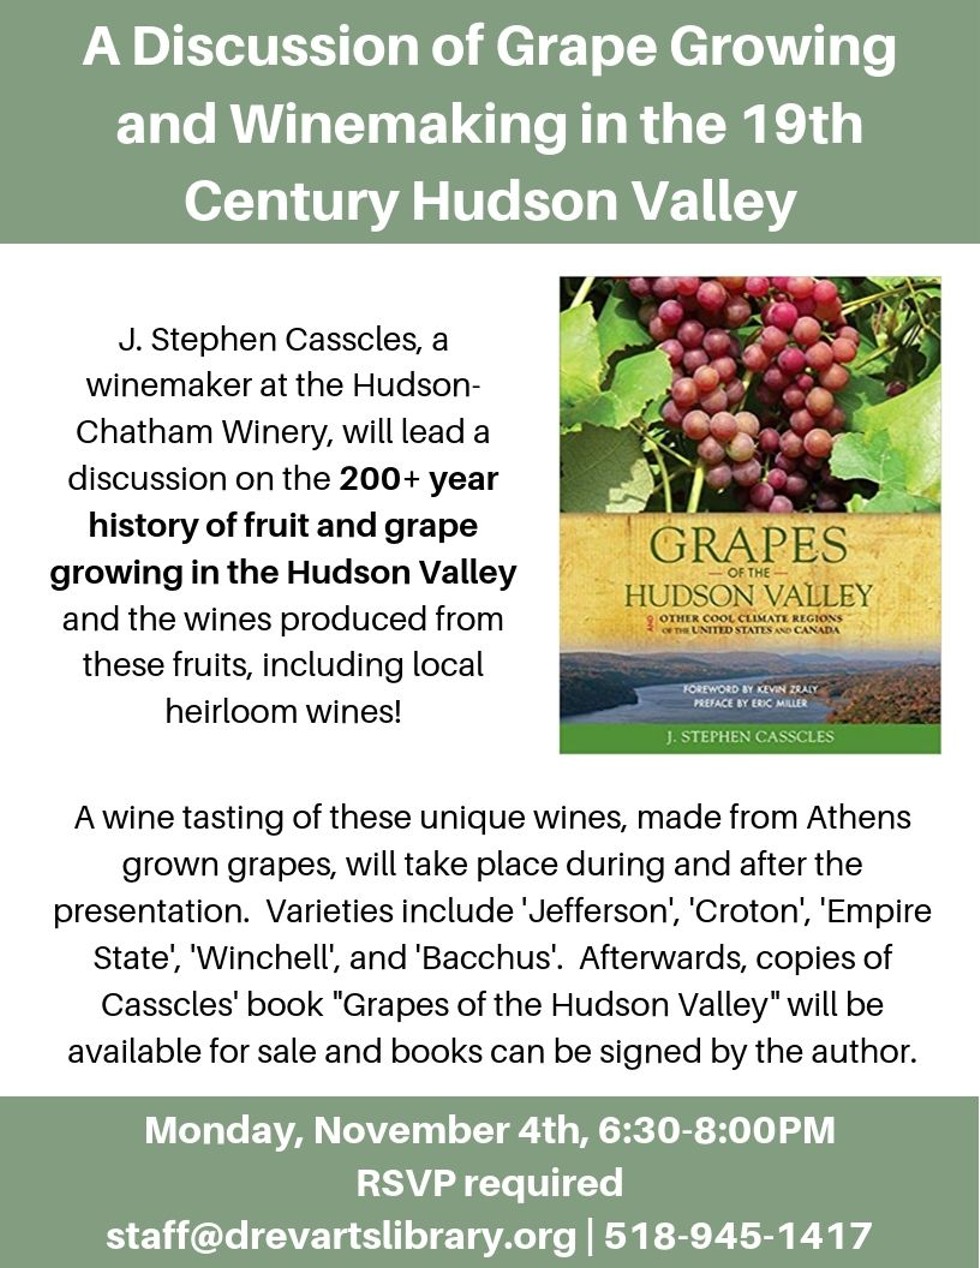 grapes_of_the_hudson_valley.jpg